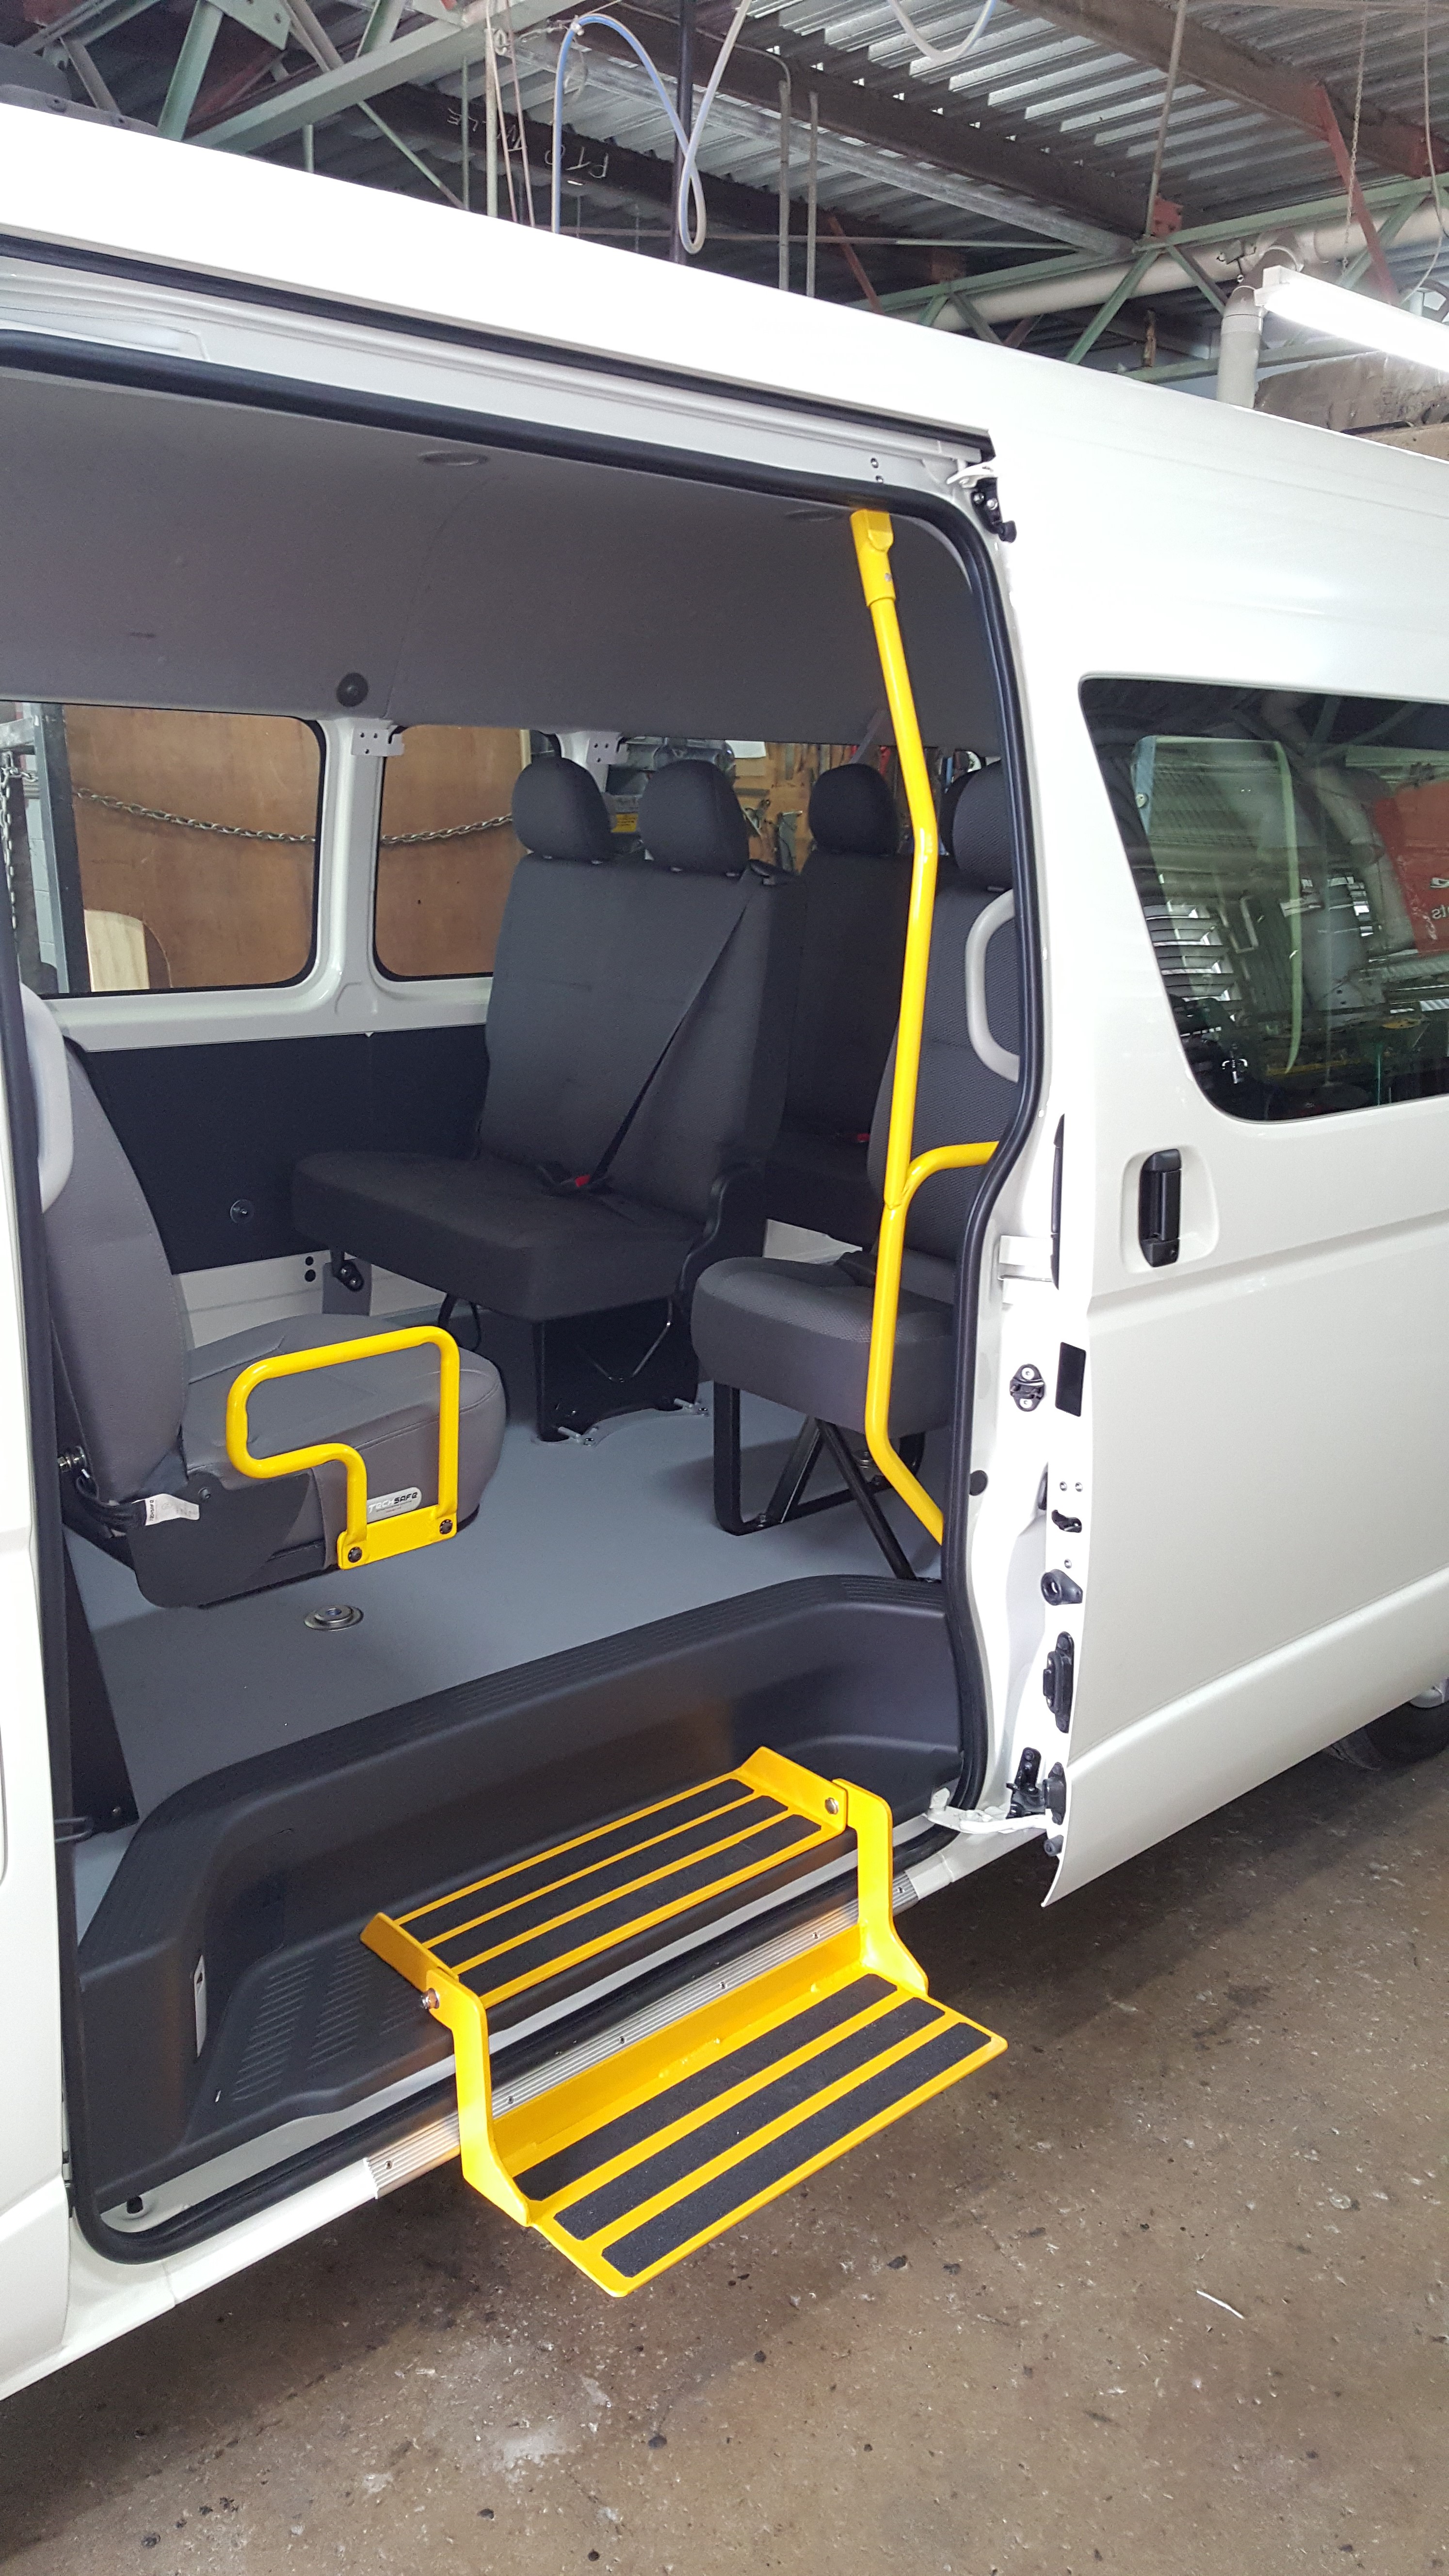 Manual Fold down step with Grab rails on fold up seat